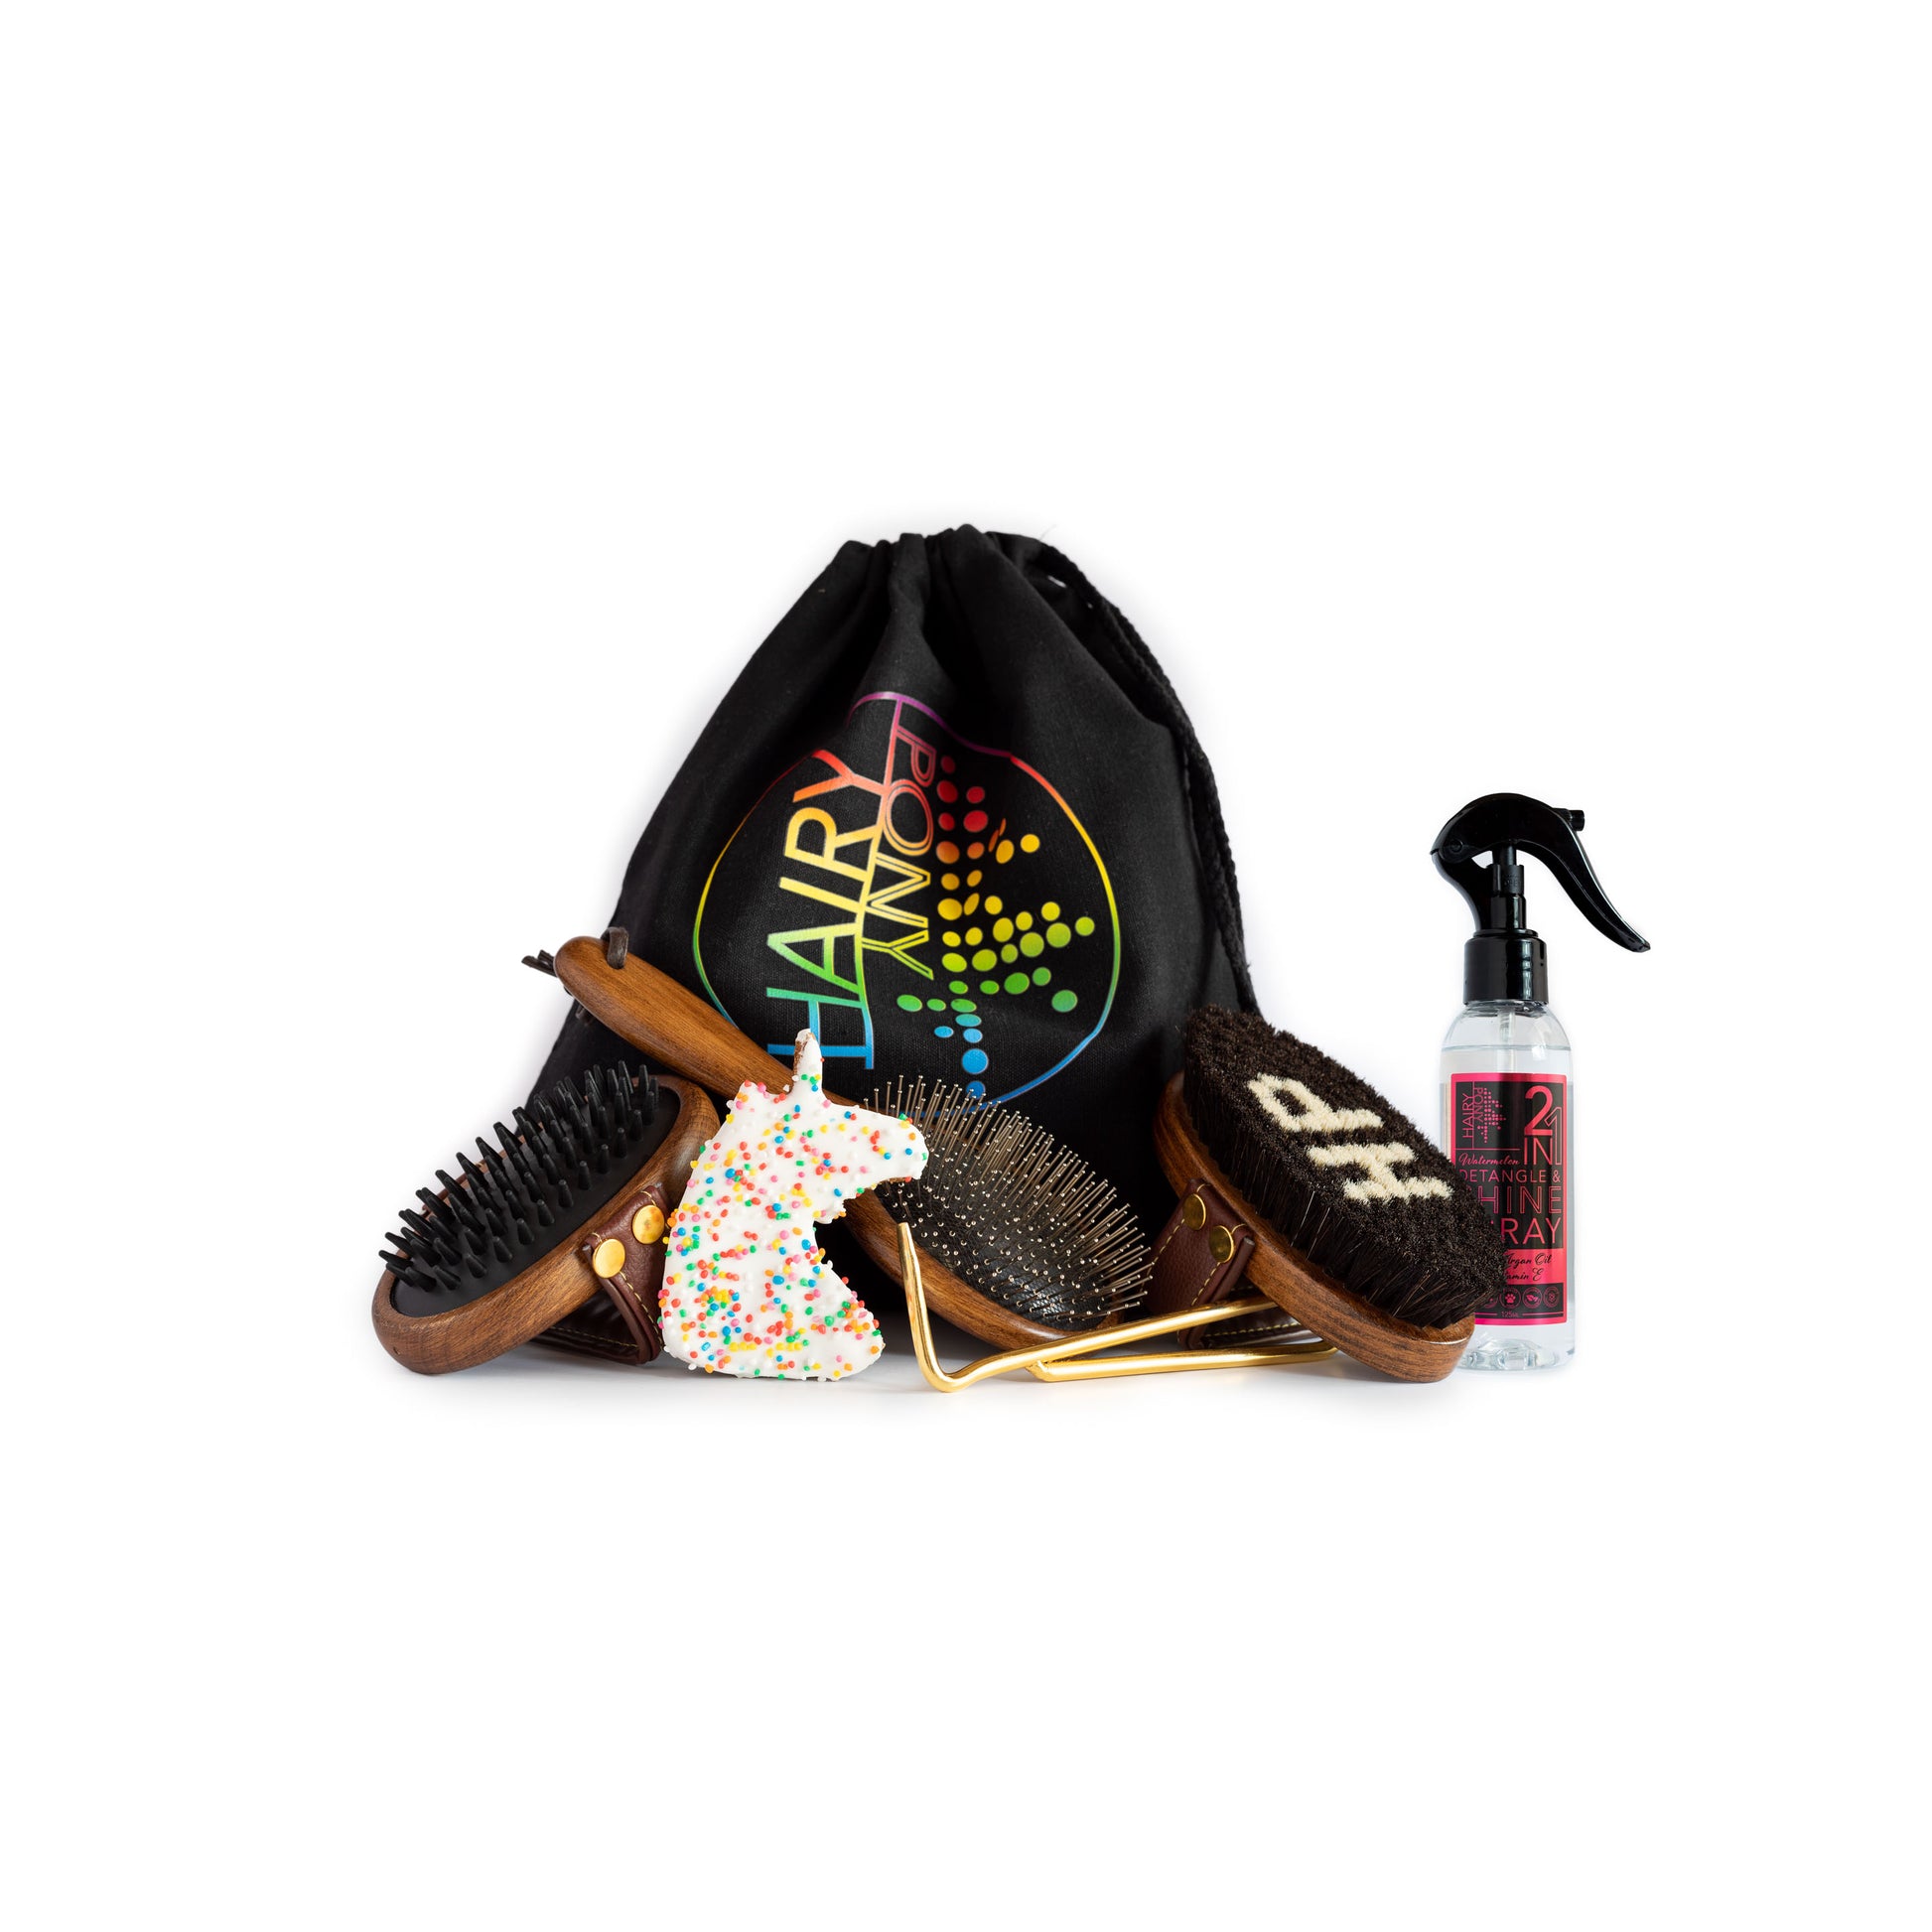 Hairy Pony Kids Grooming Kit contents with drawstring travel bag.